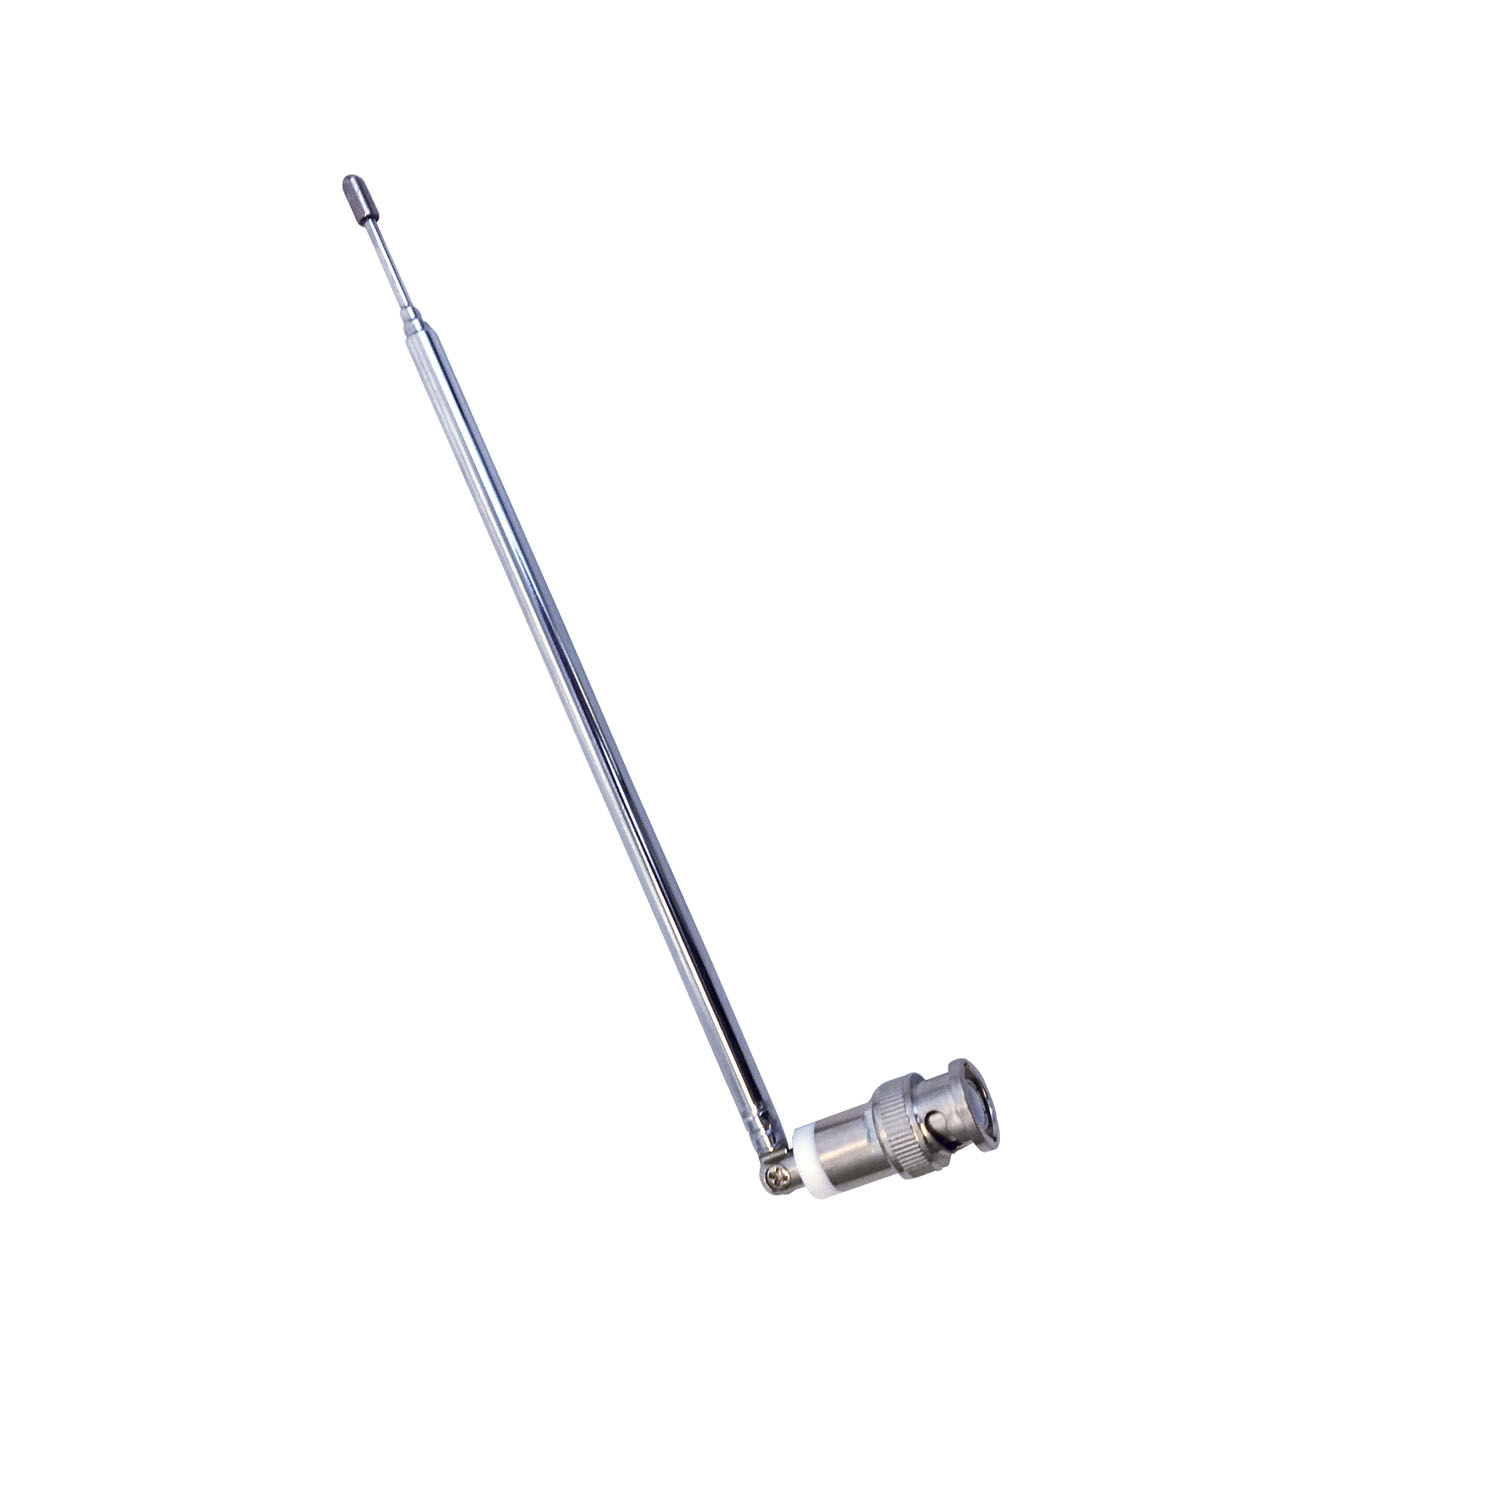 WORKMAN - WEPA2 METAL FOLD OVER TELESCOPING BNC REPLACEMENT ANTENNA FOR SCANNERS